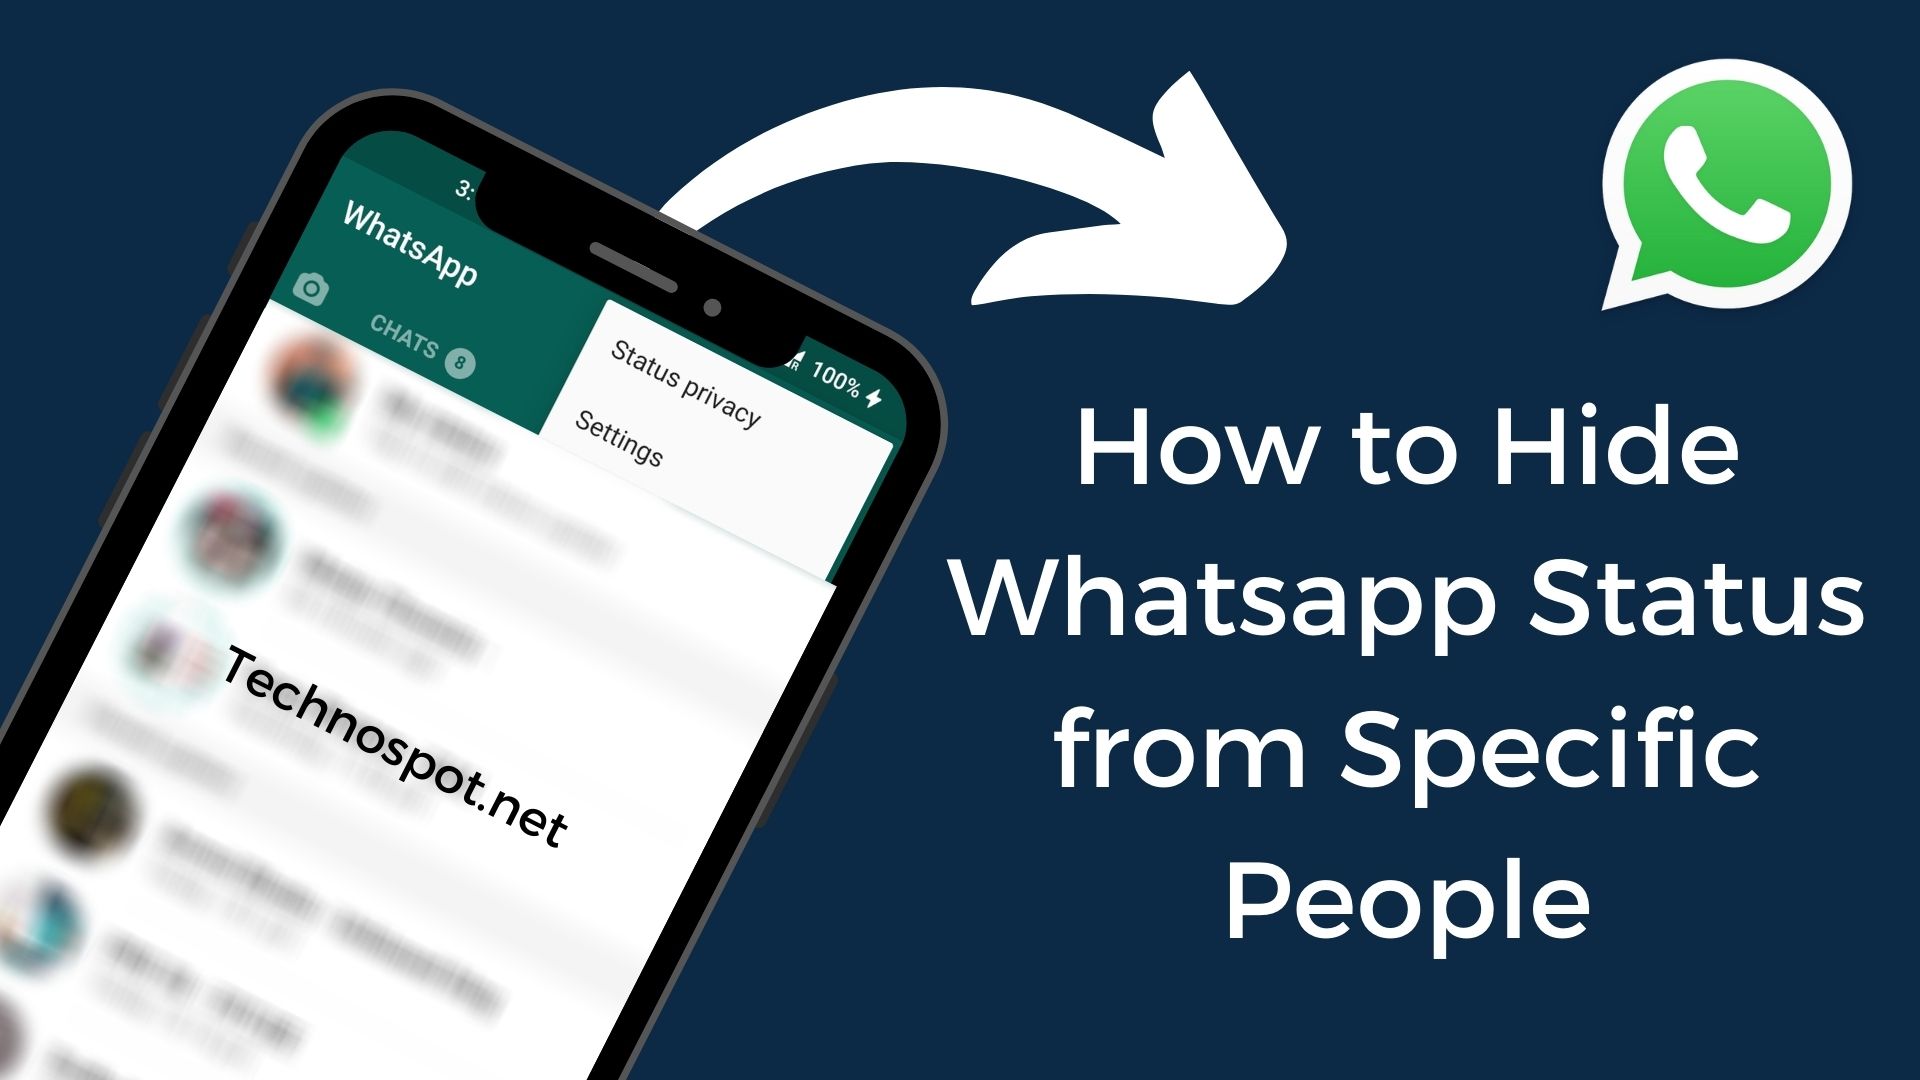 how to block someone on whatsapp from seeing your status